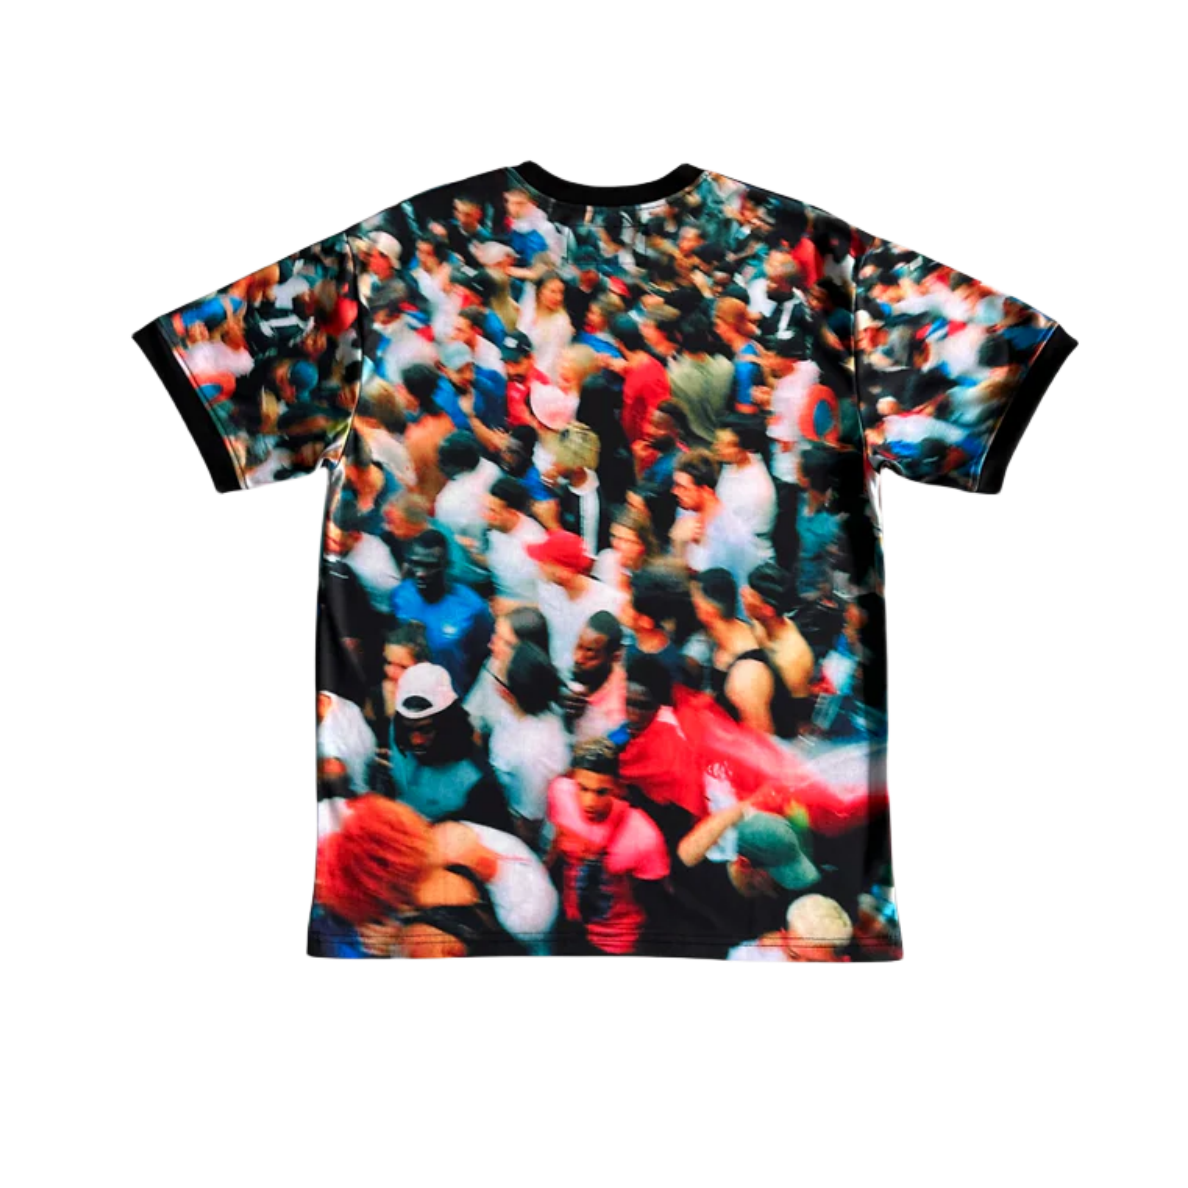 Corteiz World Cup Chaos Ribbed Tee Short sleeve T-shirt - MULTICOLOR